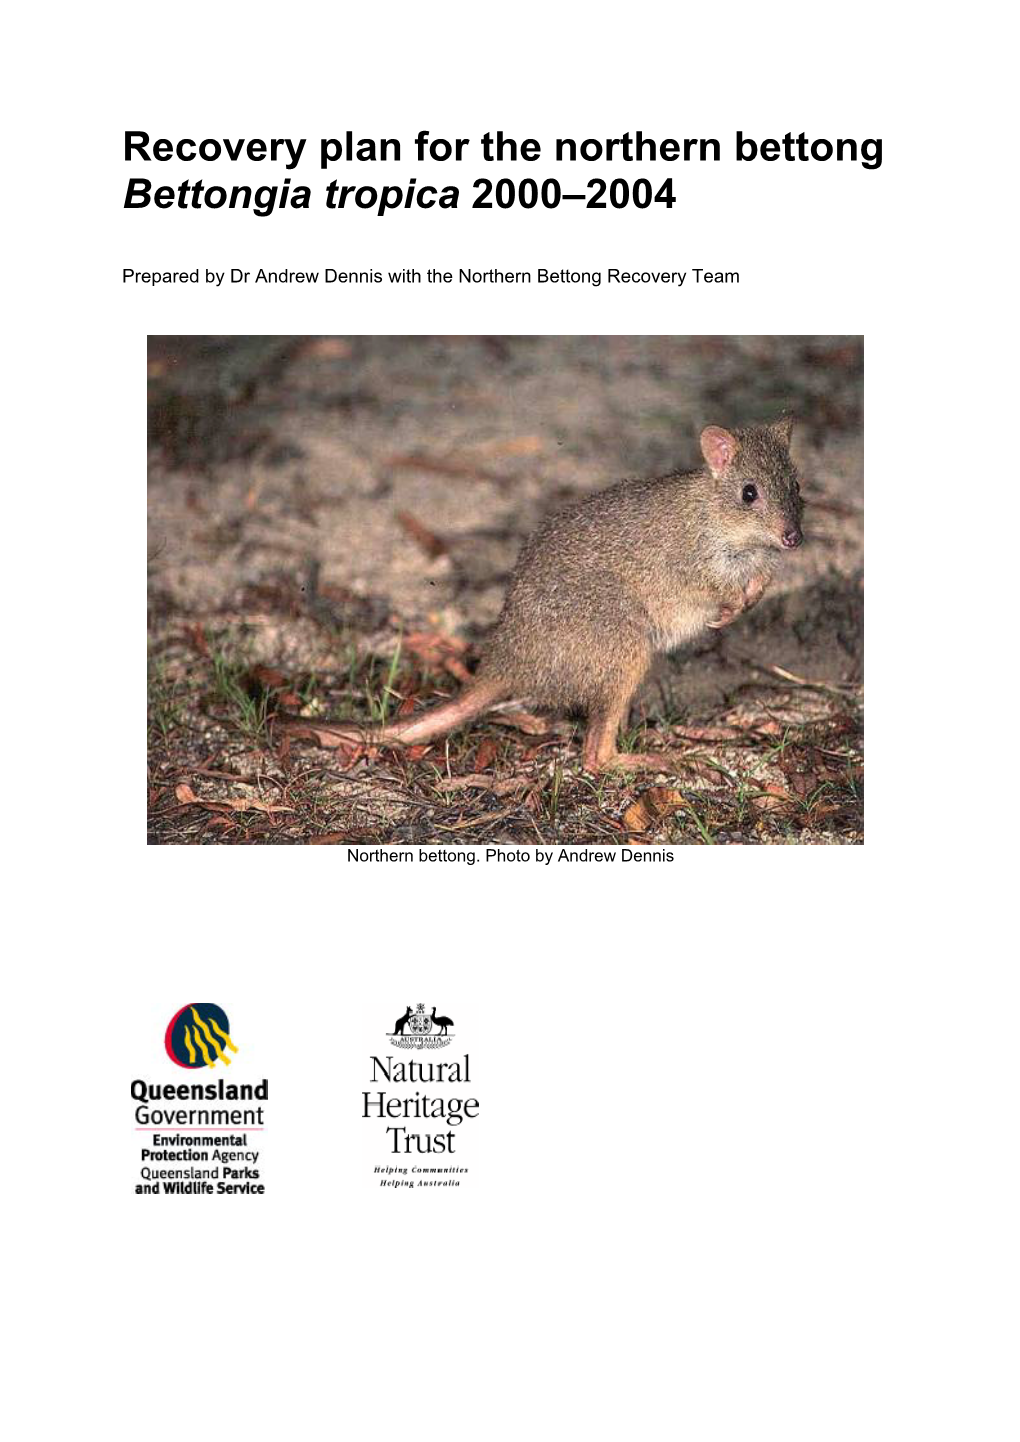 Recovery Plan for the Northern Bettong (Bettongia Tropica)